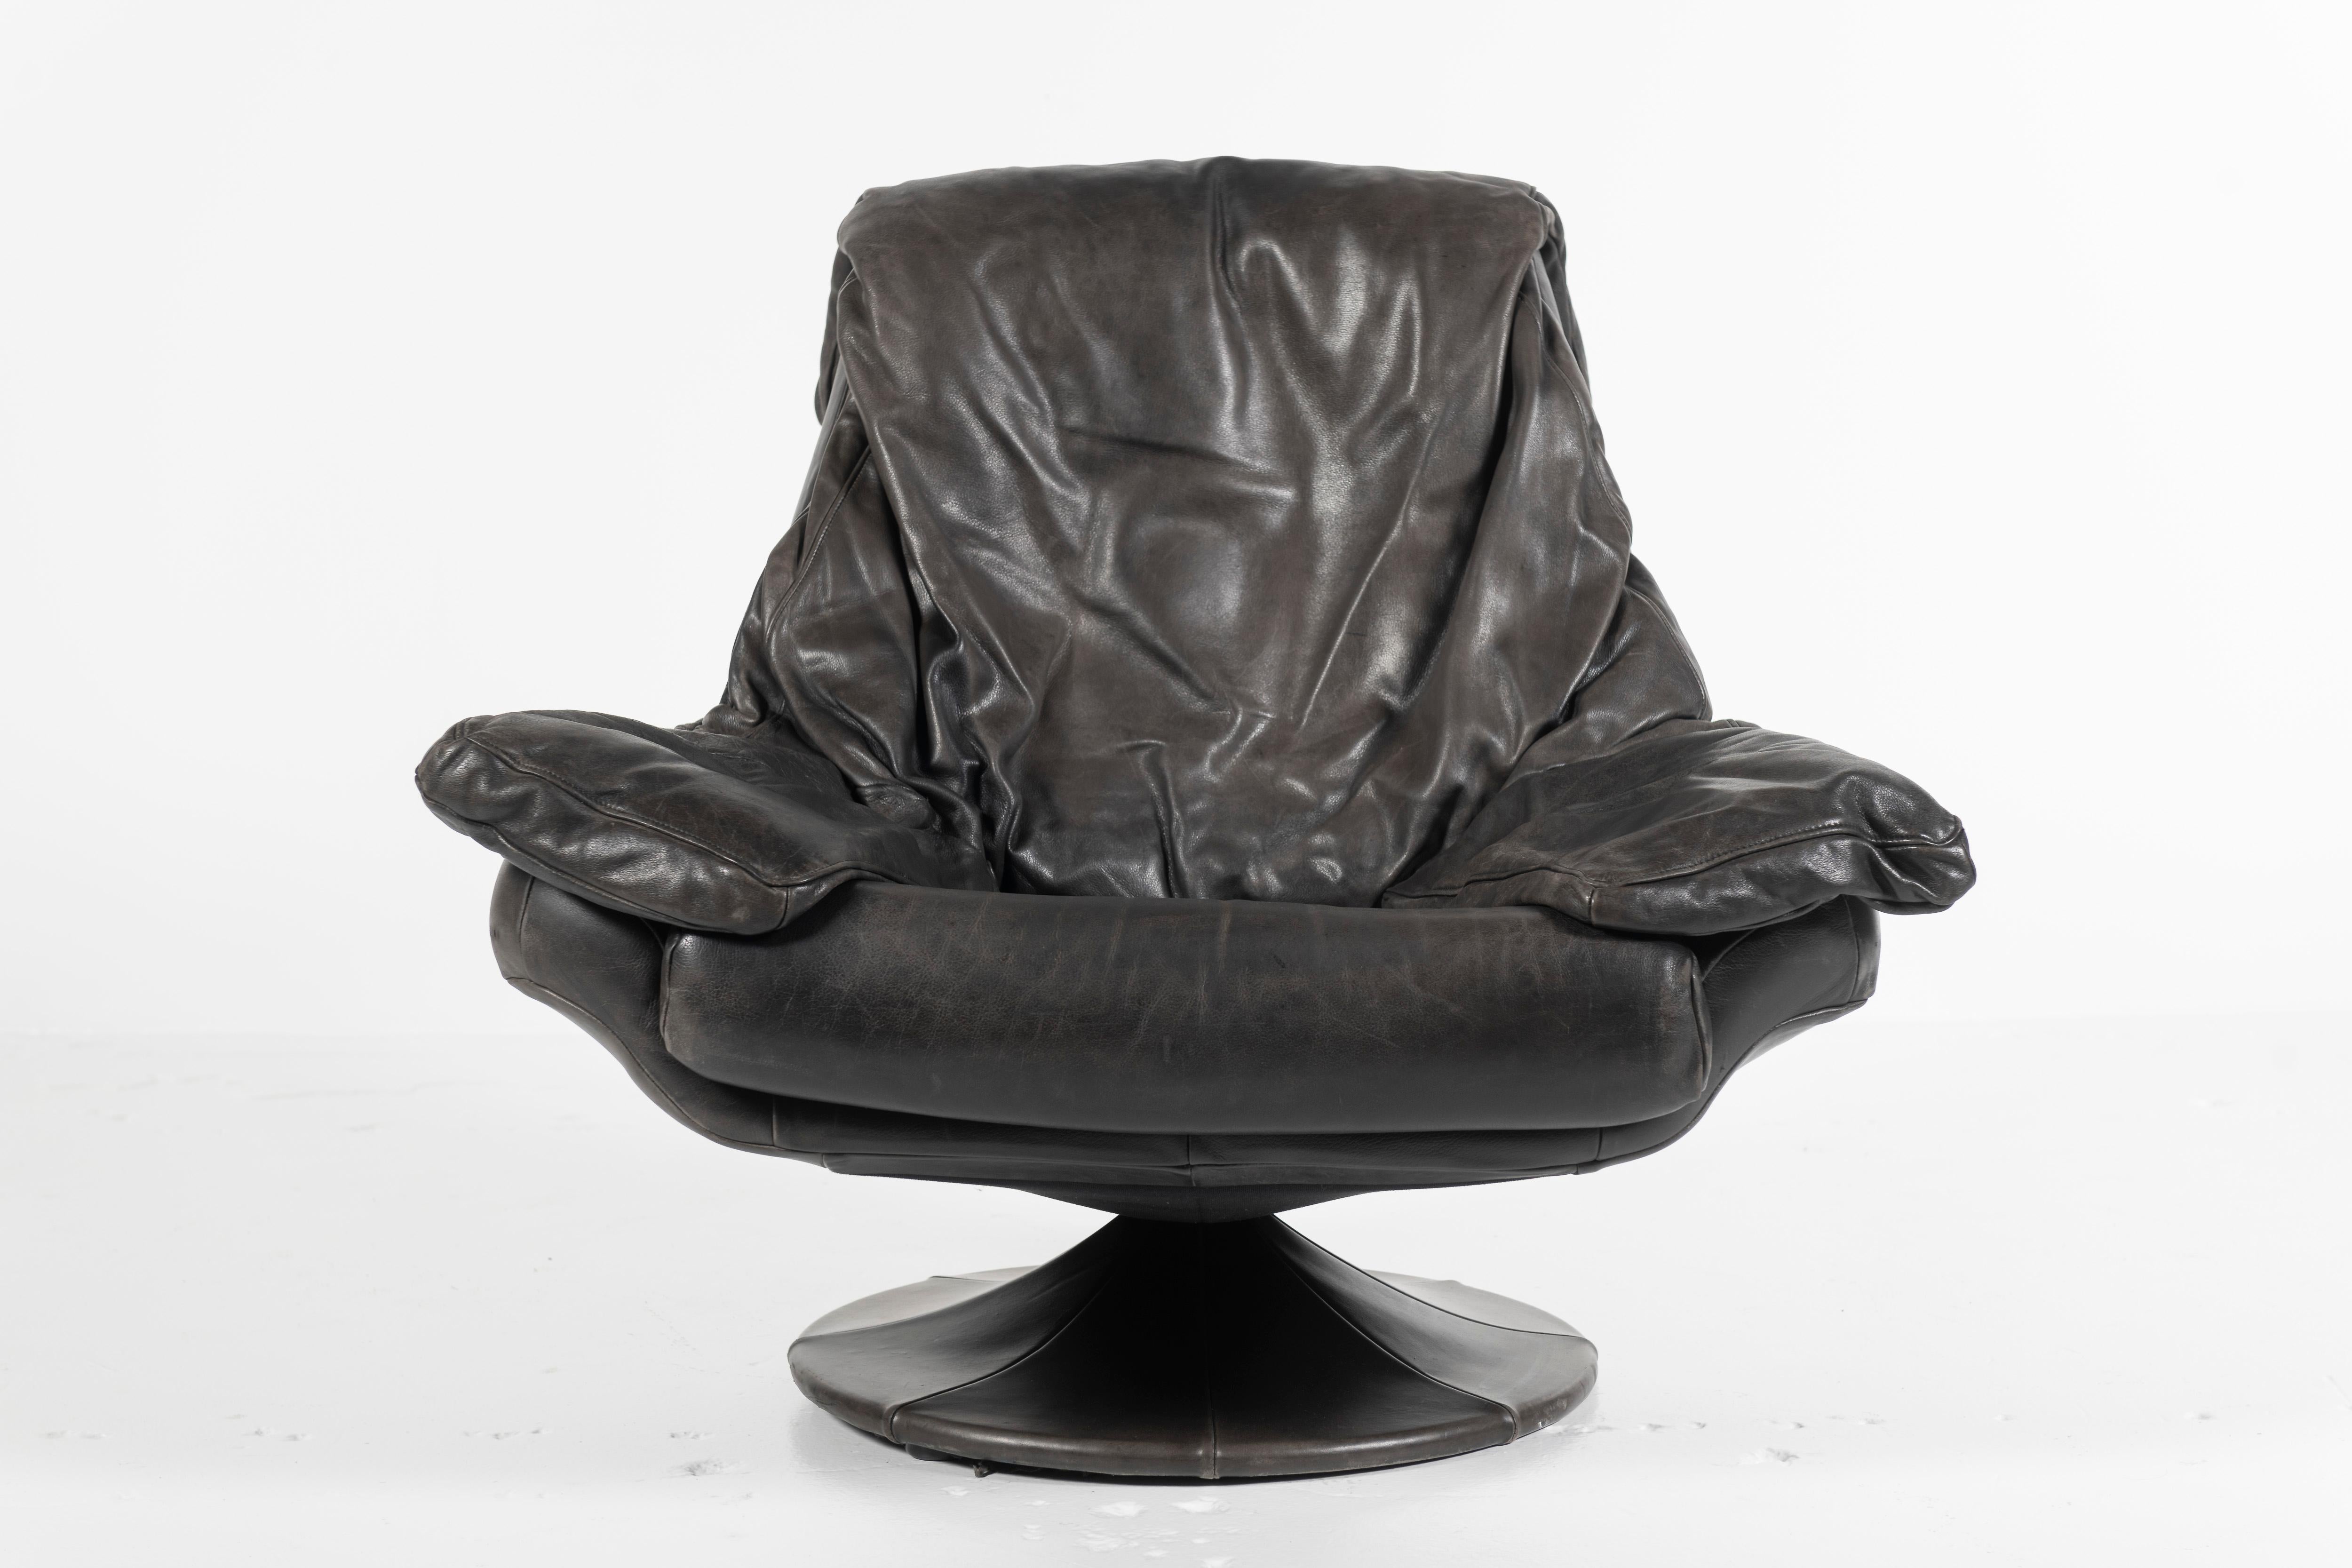 Relax and enjoy your favorite beverage in this super comfortable swivel chair made in Denmark of black leather on a wooden frame resting upon a leather upholstered base. The leather has the patina you'd expect of a beloved lounge chair. Great piece